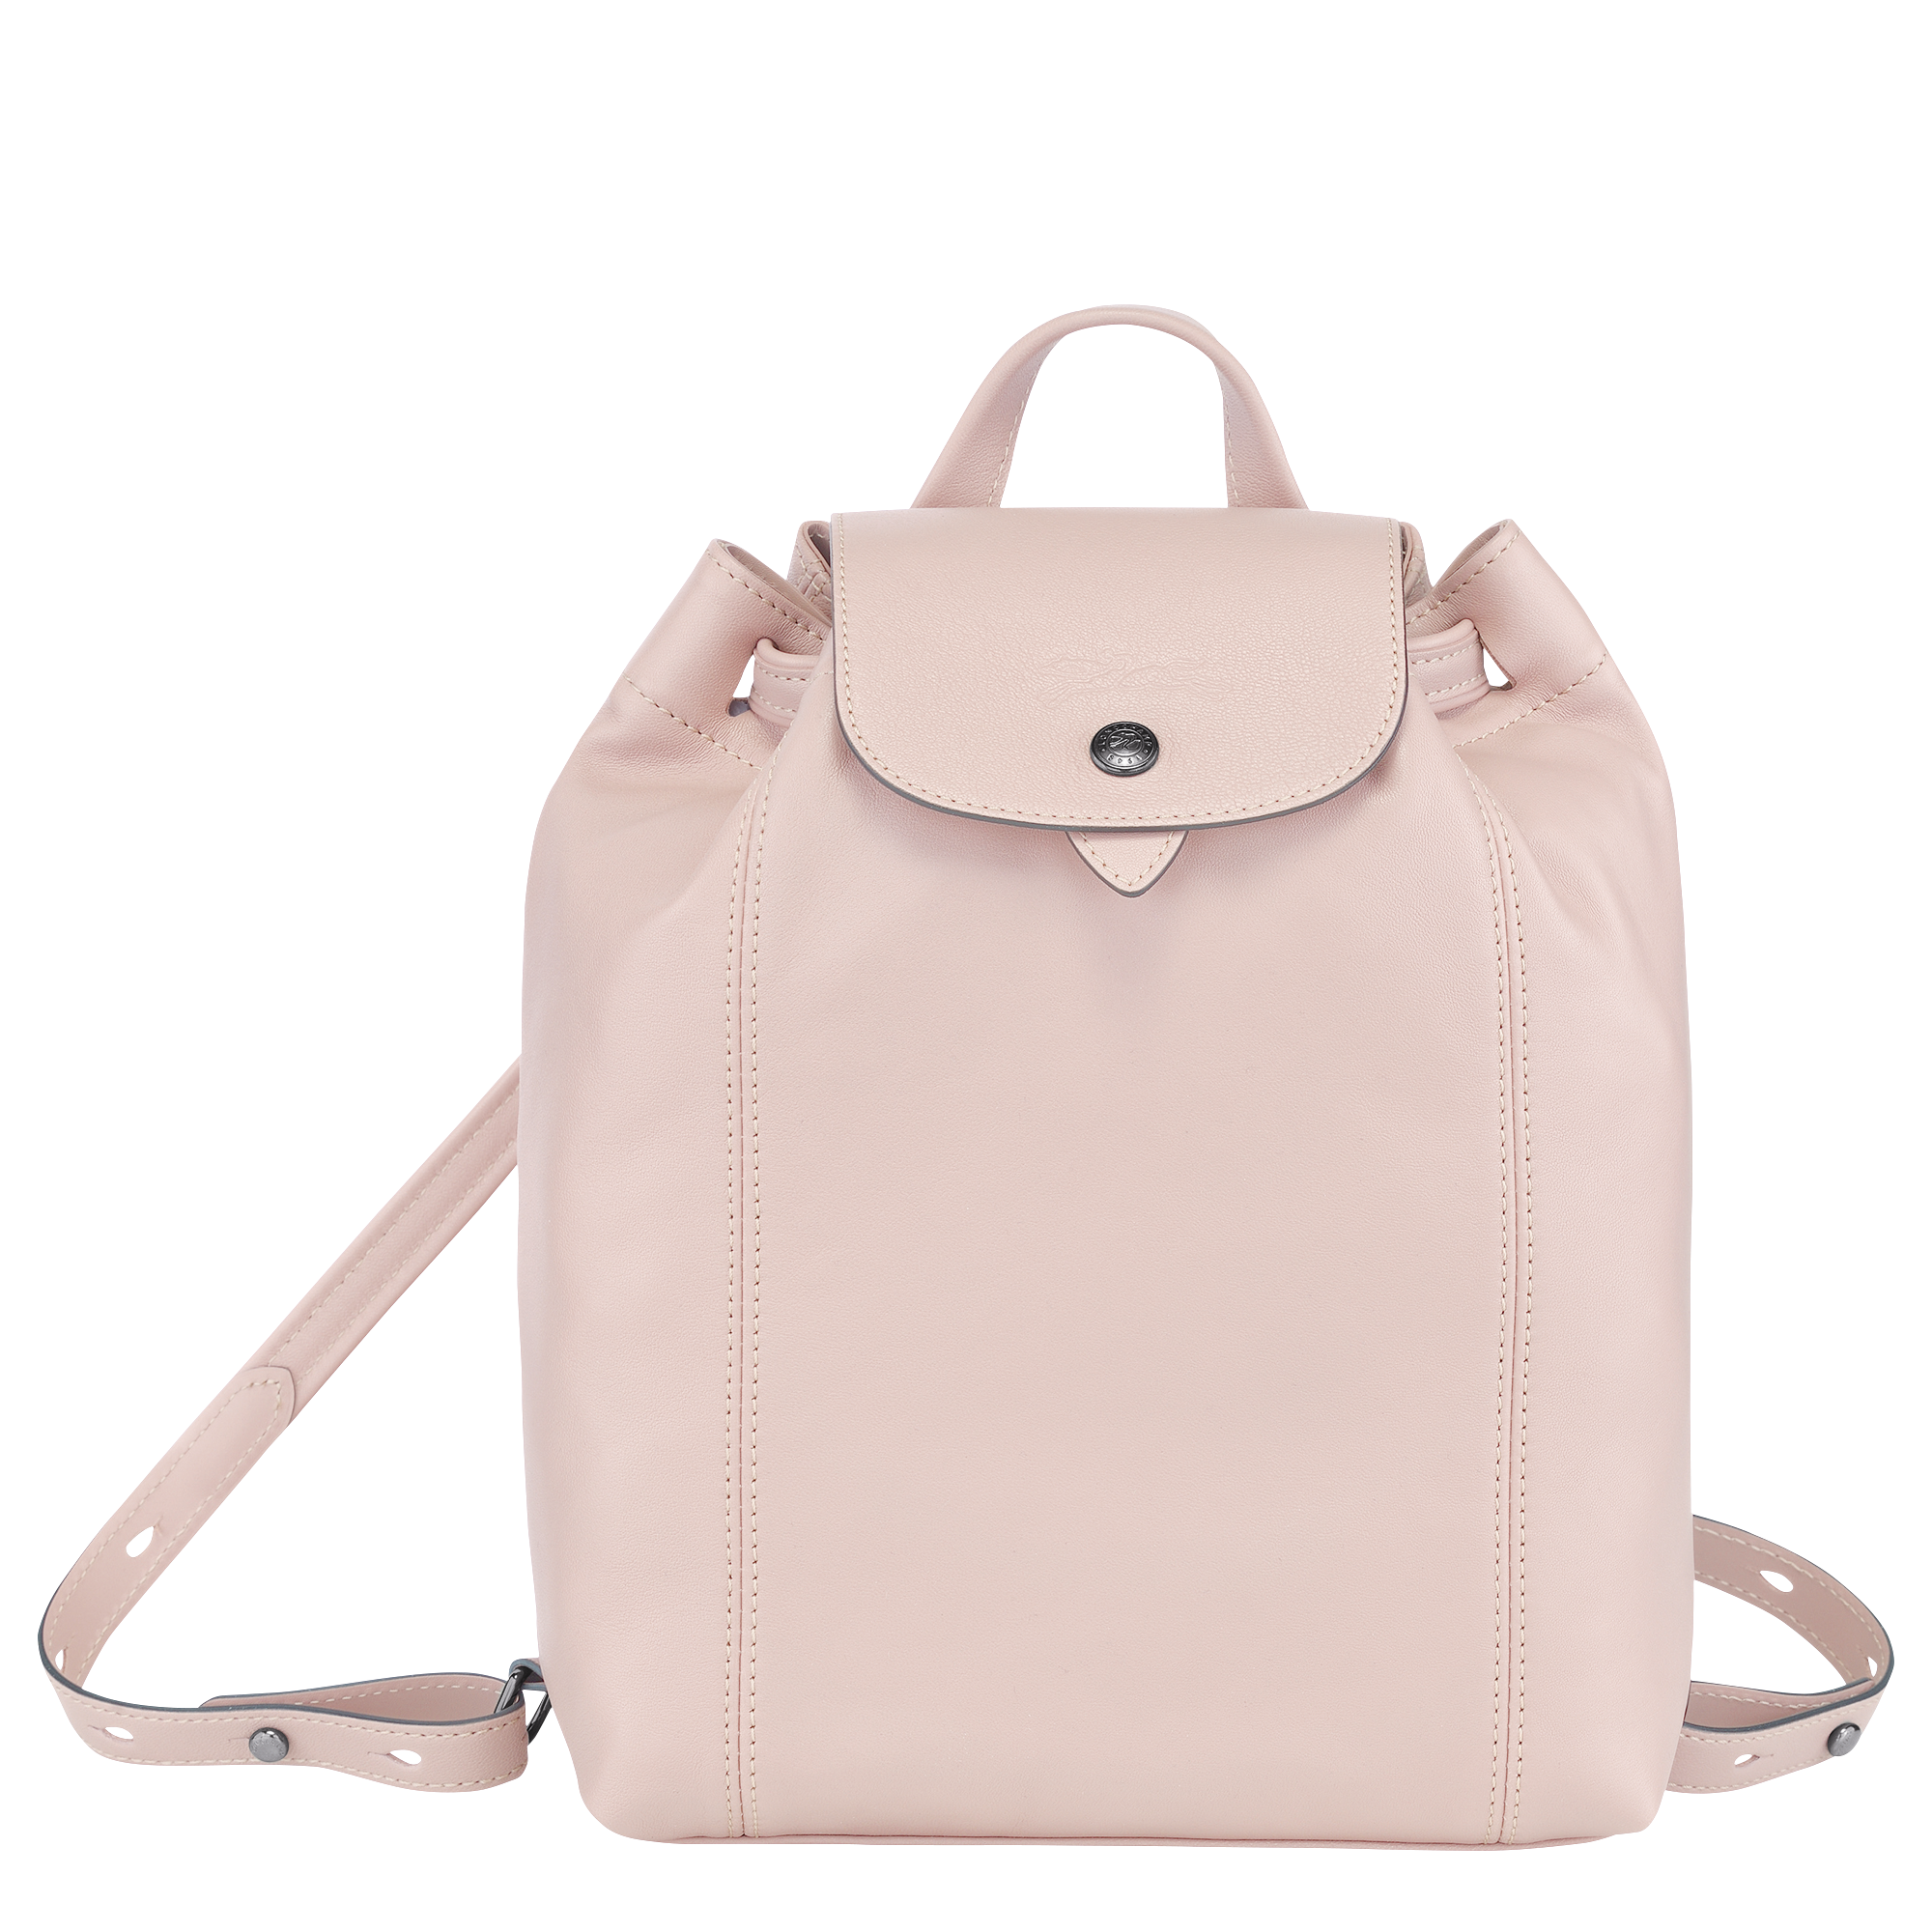 Backpack Le Pliage Cuir Pale Pink 